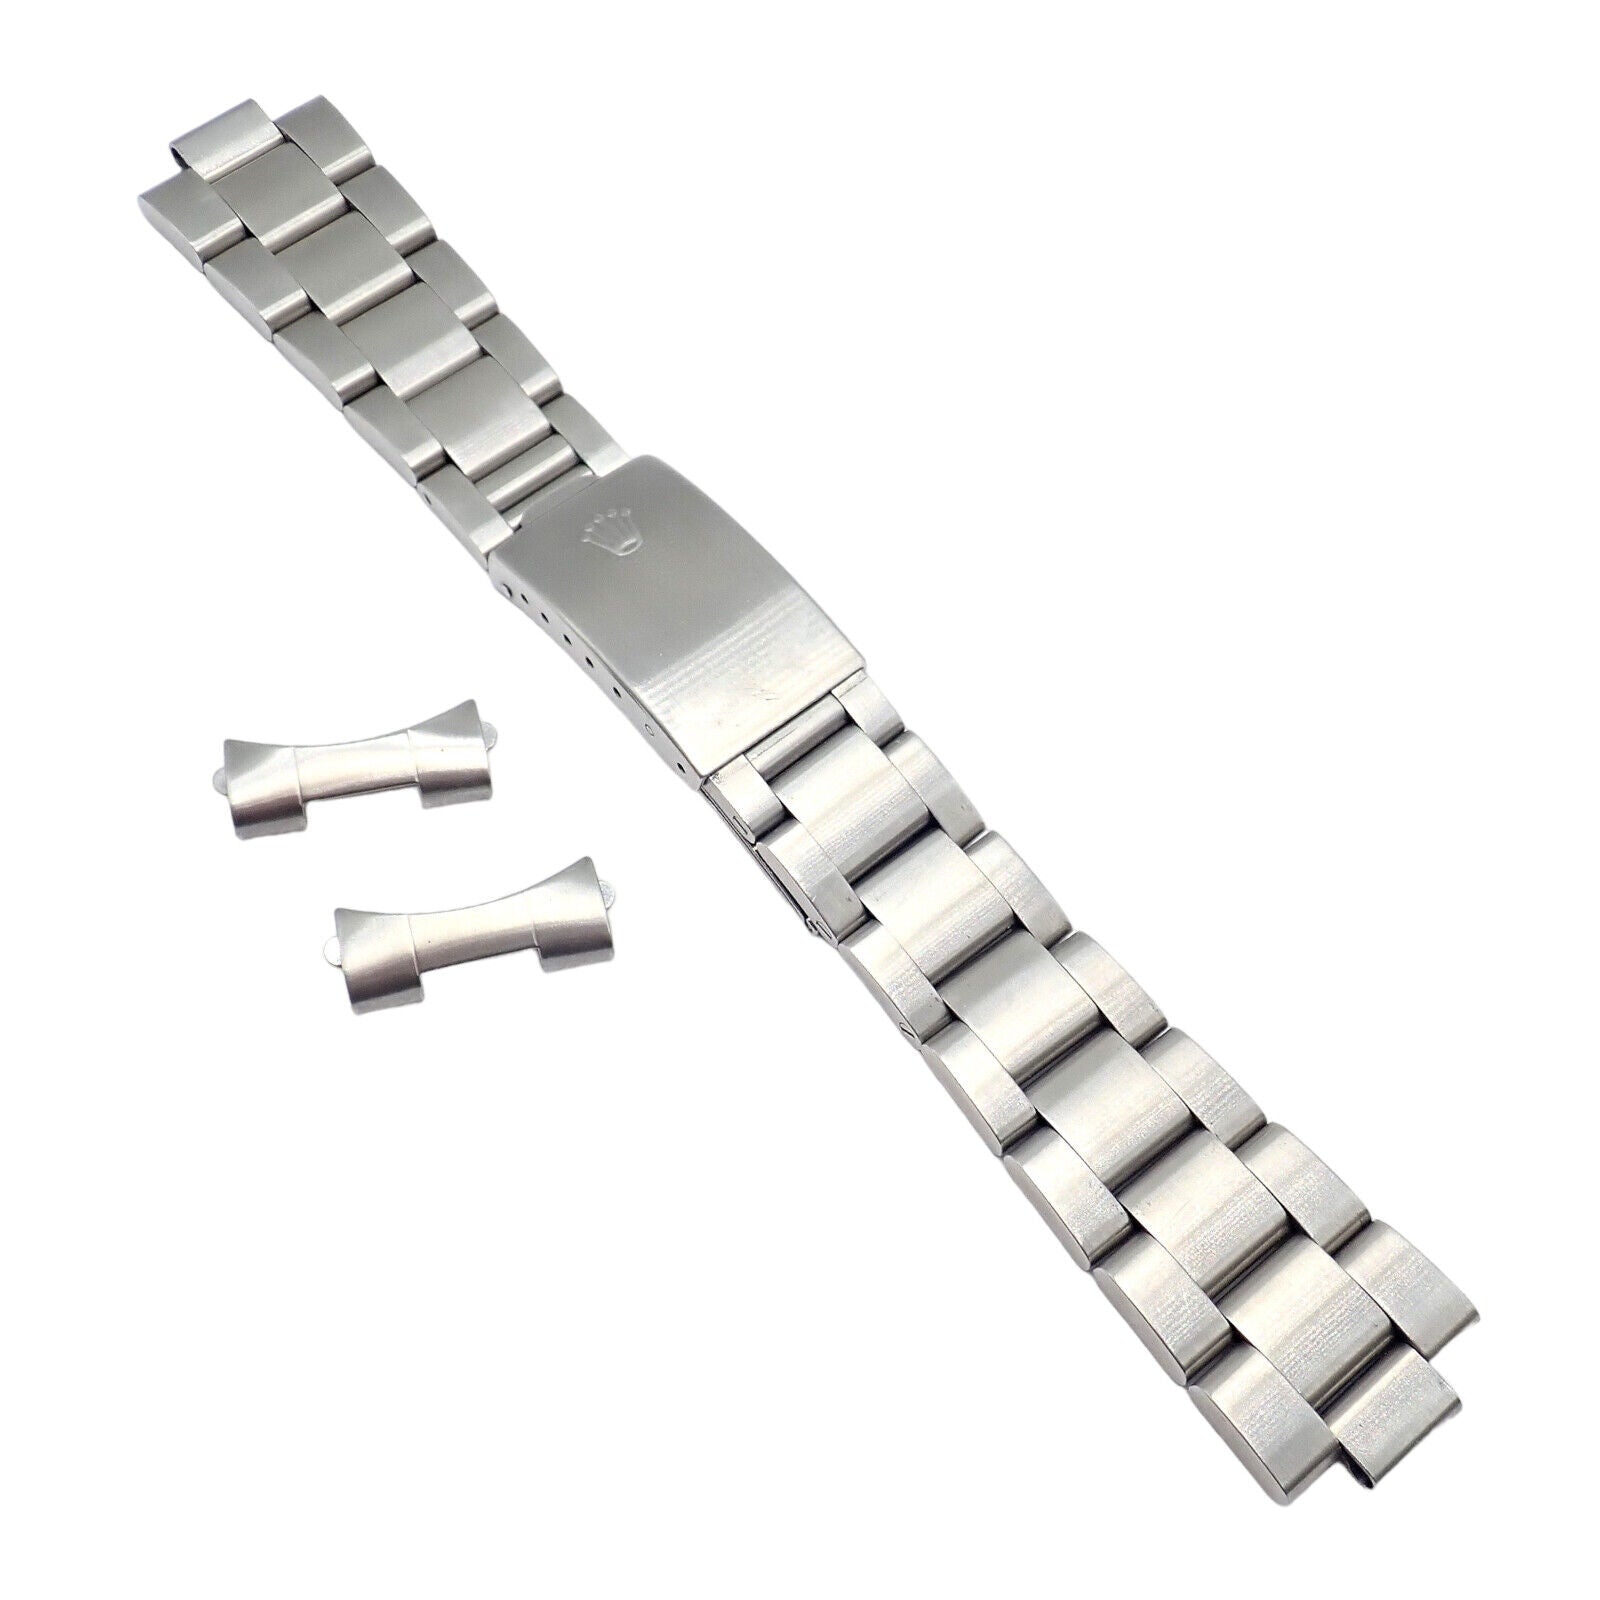 Rolex Jewelry & Watches:Watches, Parts & Accessories:Parts, Tools & Guides:Parts:Other Watch Parts Original Rolex End Links 20mm 580 Buckle Bracelet 78360 Oyster Band Set